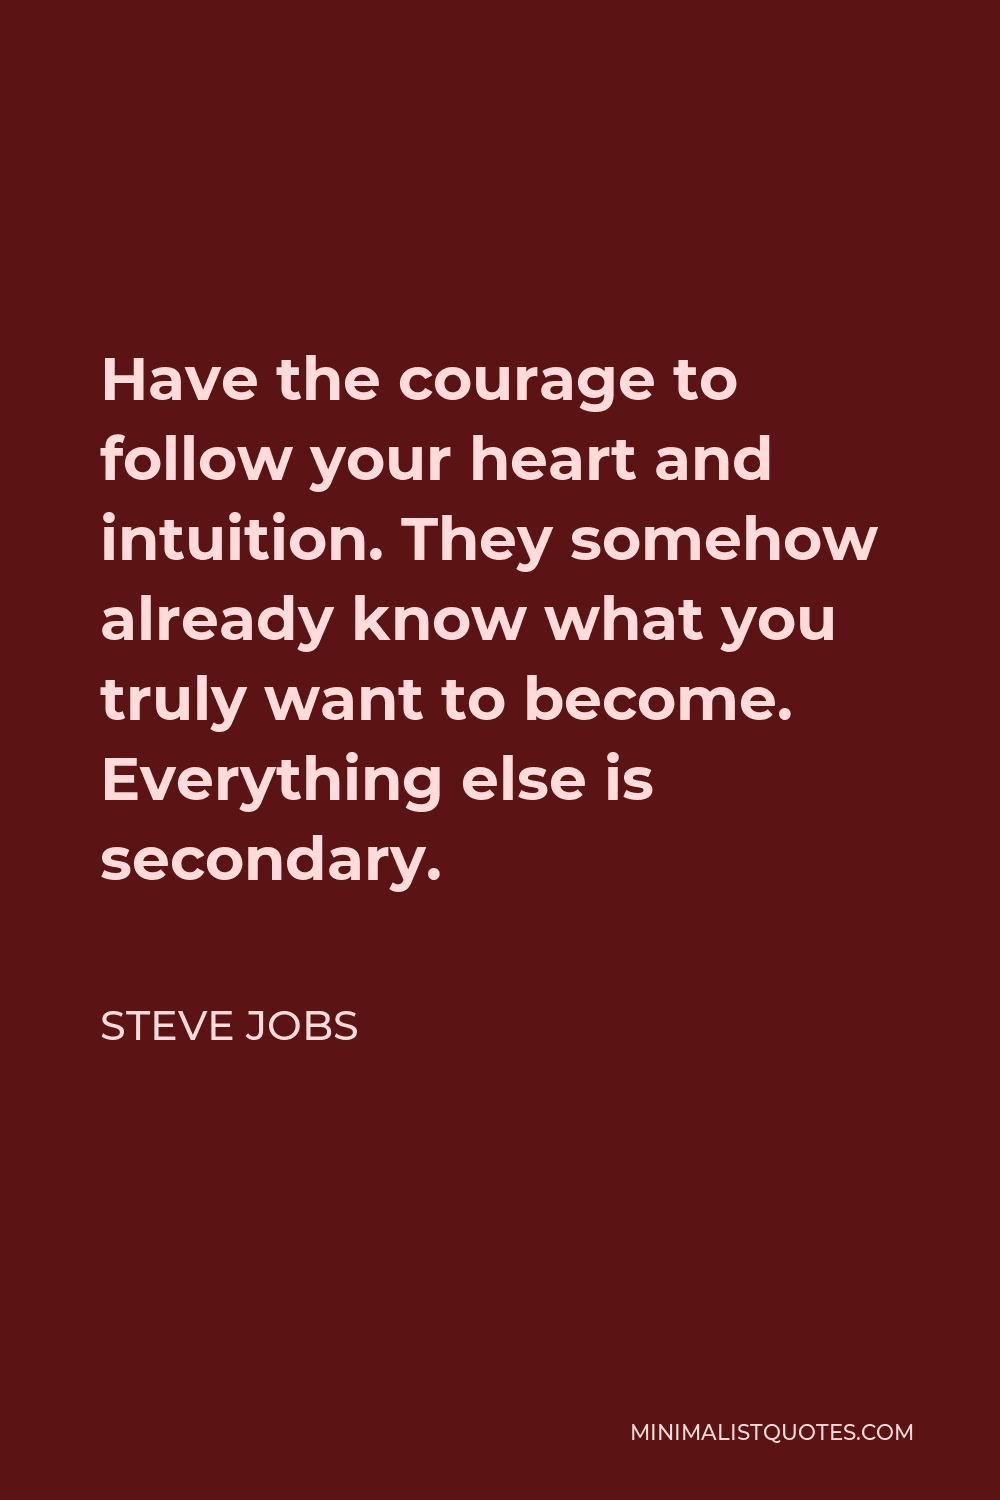 Steve Jobs Quote - Have the courage to follow your heart and intuition. They somehow already know what you truly want to become. Everything else is secondary.